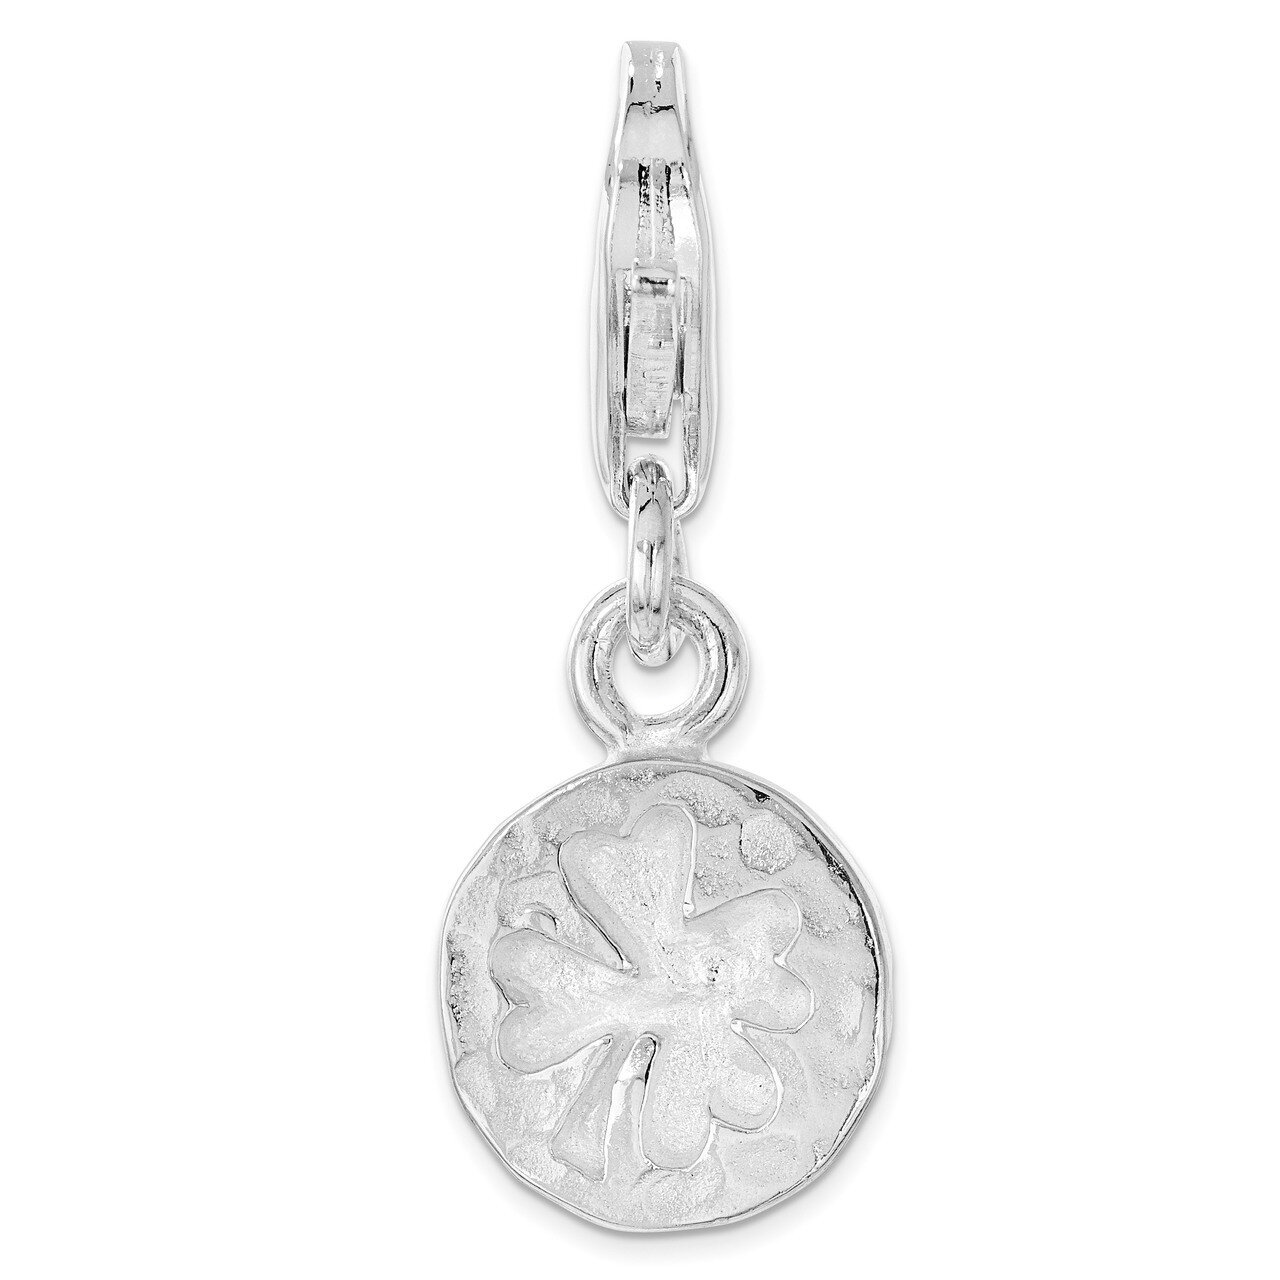 Hammered Four Leaf Clover Charm - Sterling Silver QCC1227